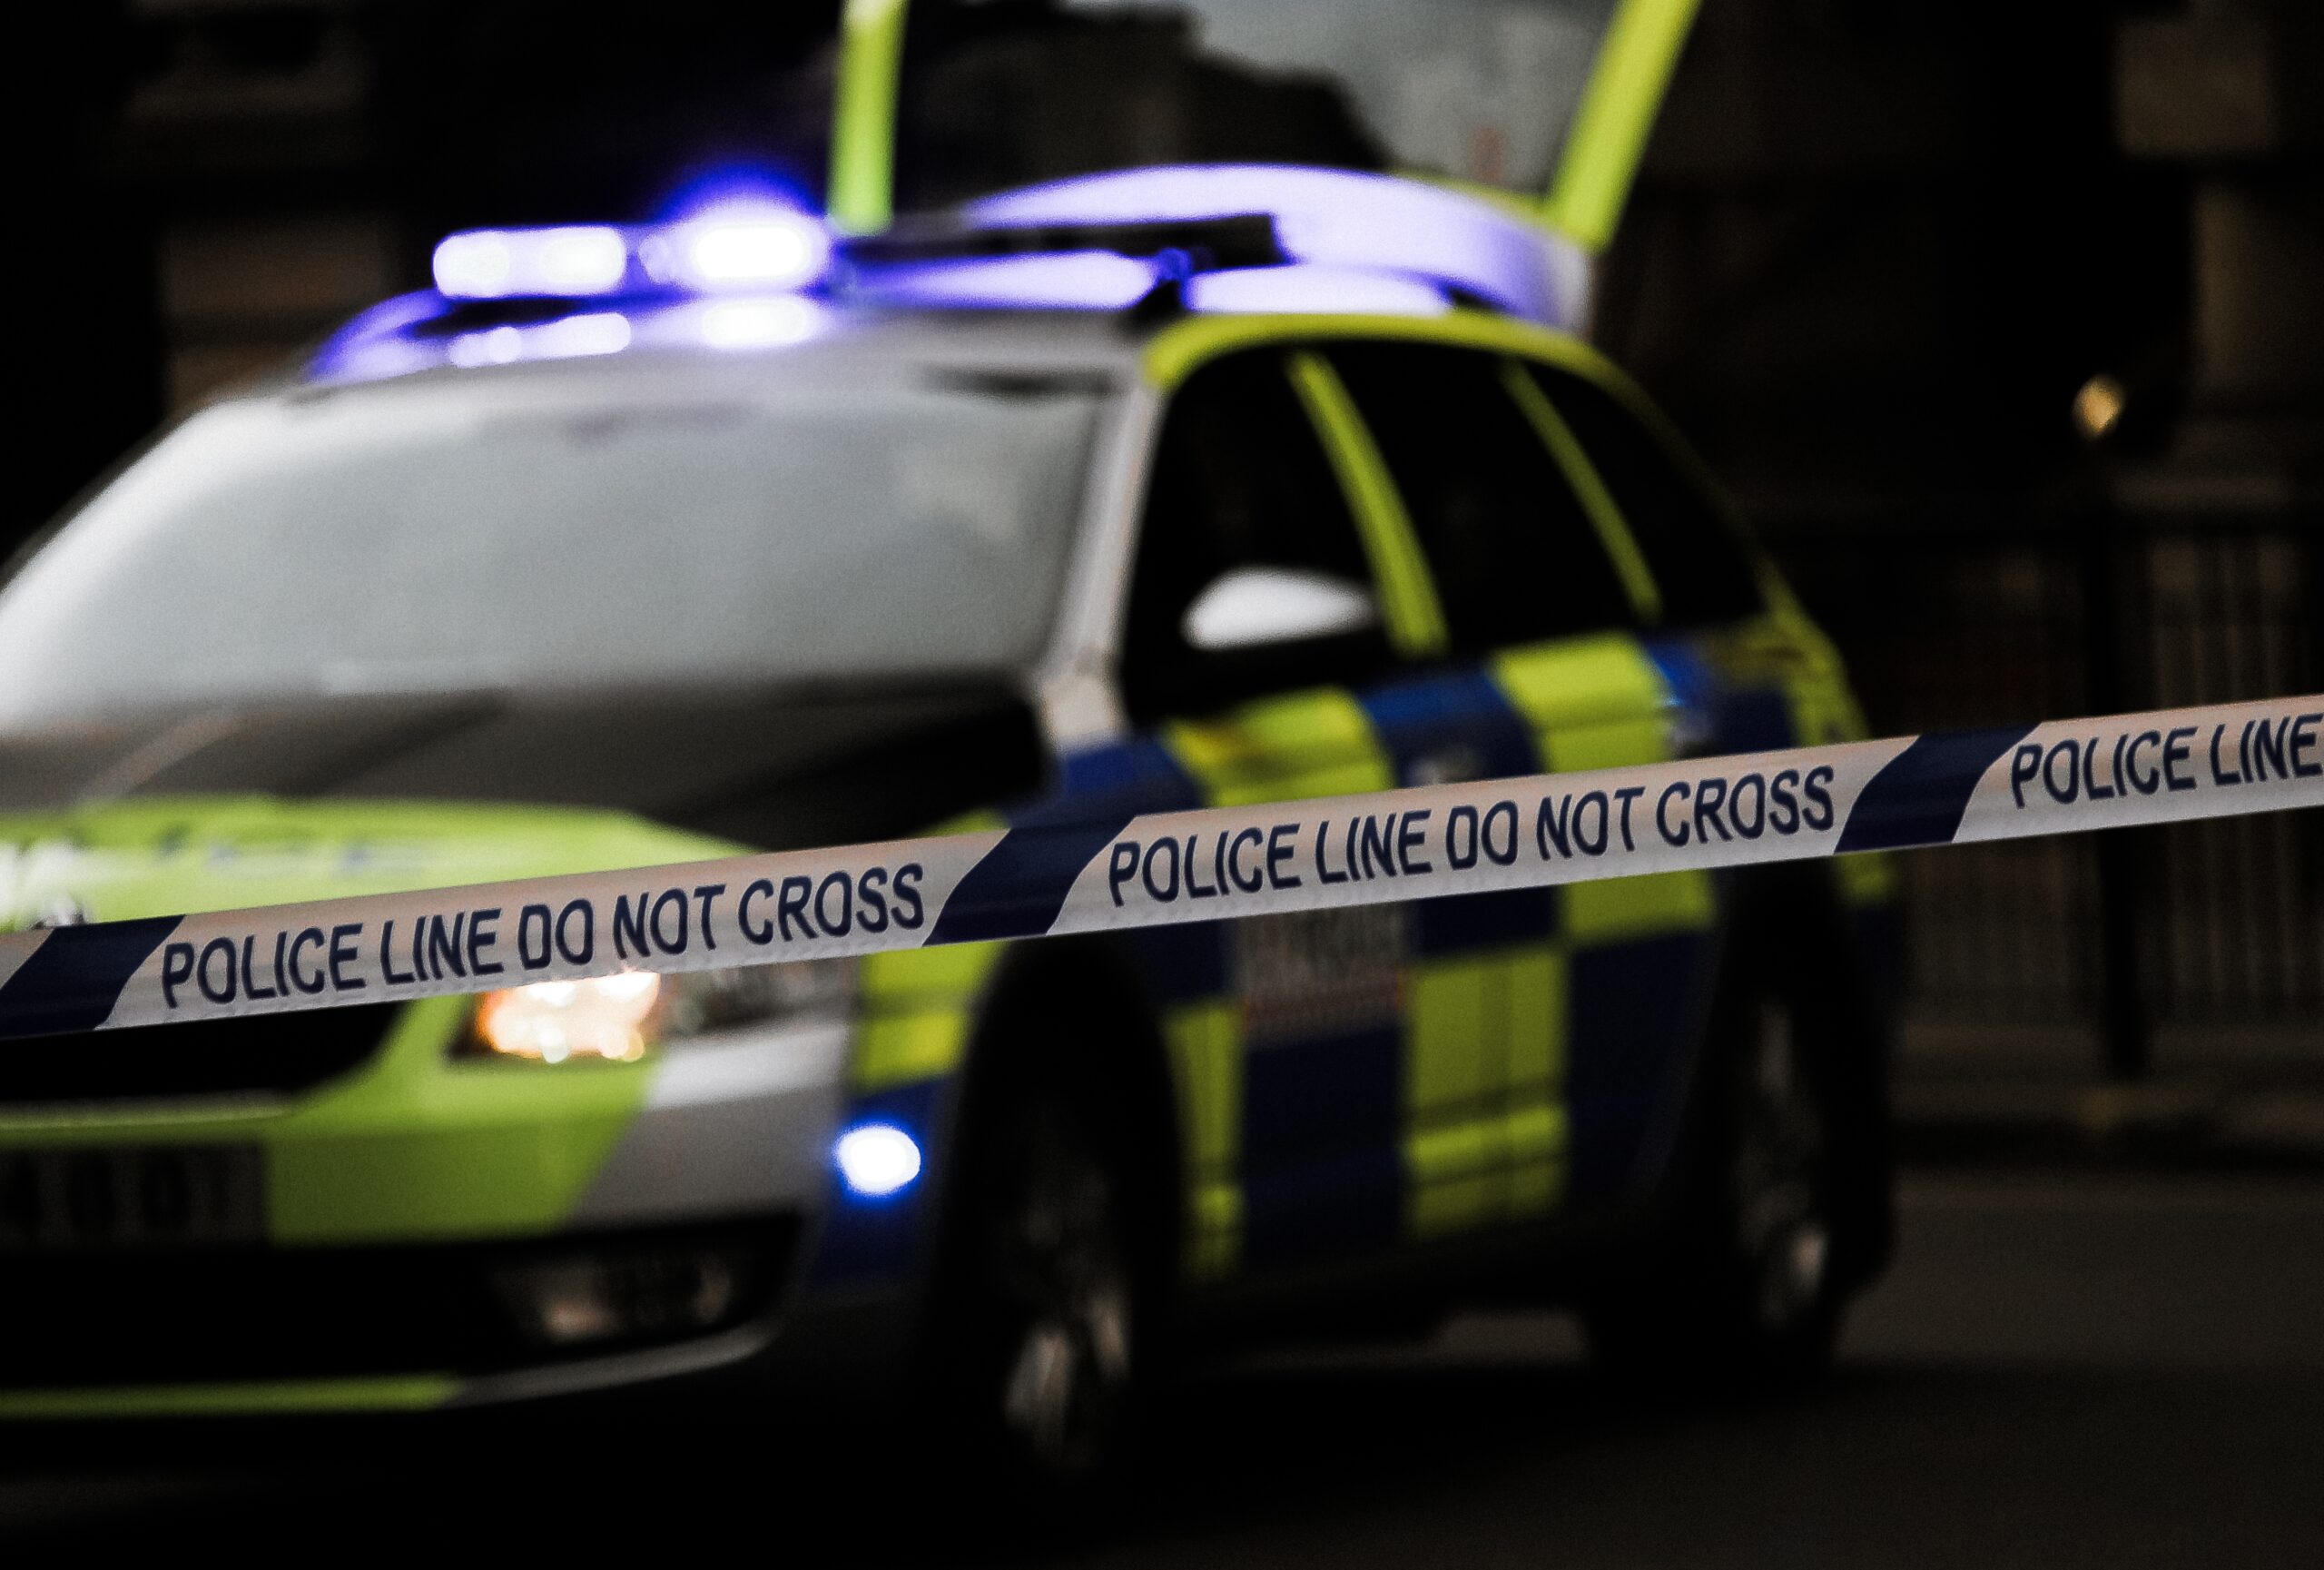 Woman hospitalised after broad daylight stabbing – South London News